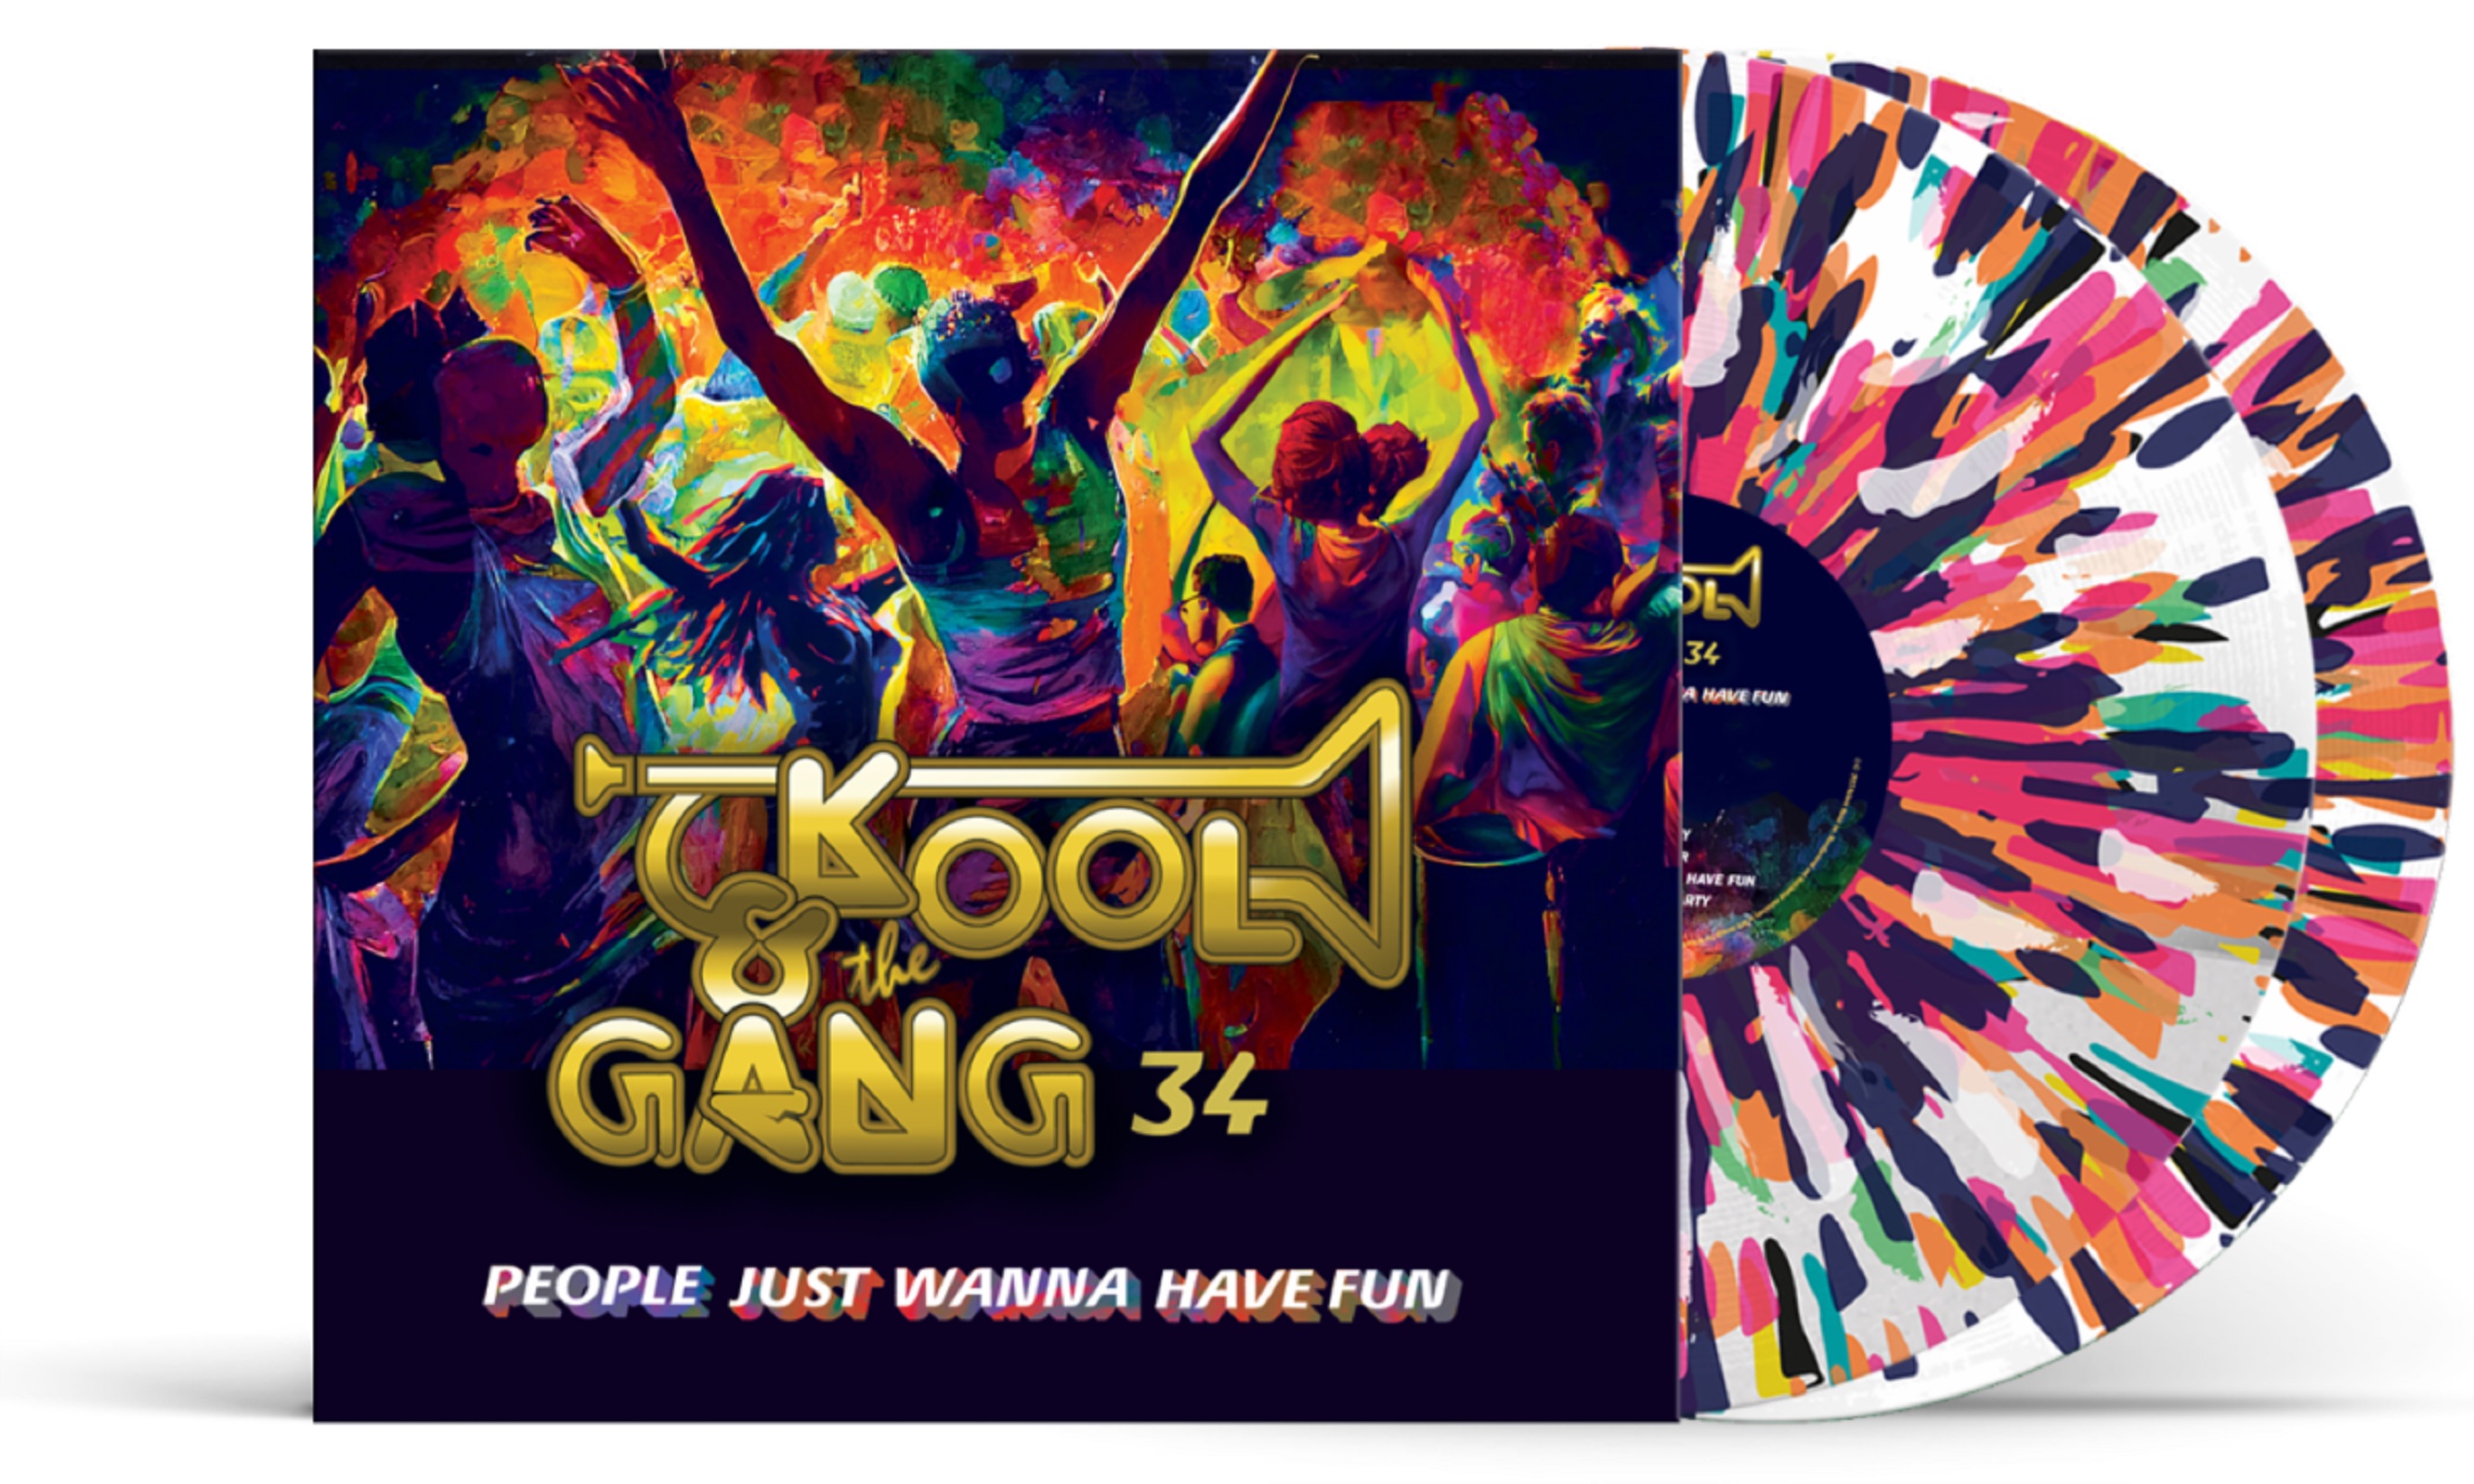 Kool & The Gang's "People Just Wanna Have Fun" Out On Deluxe Vinyl + CD